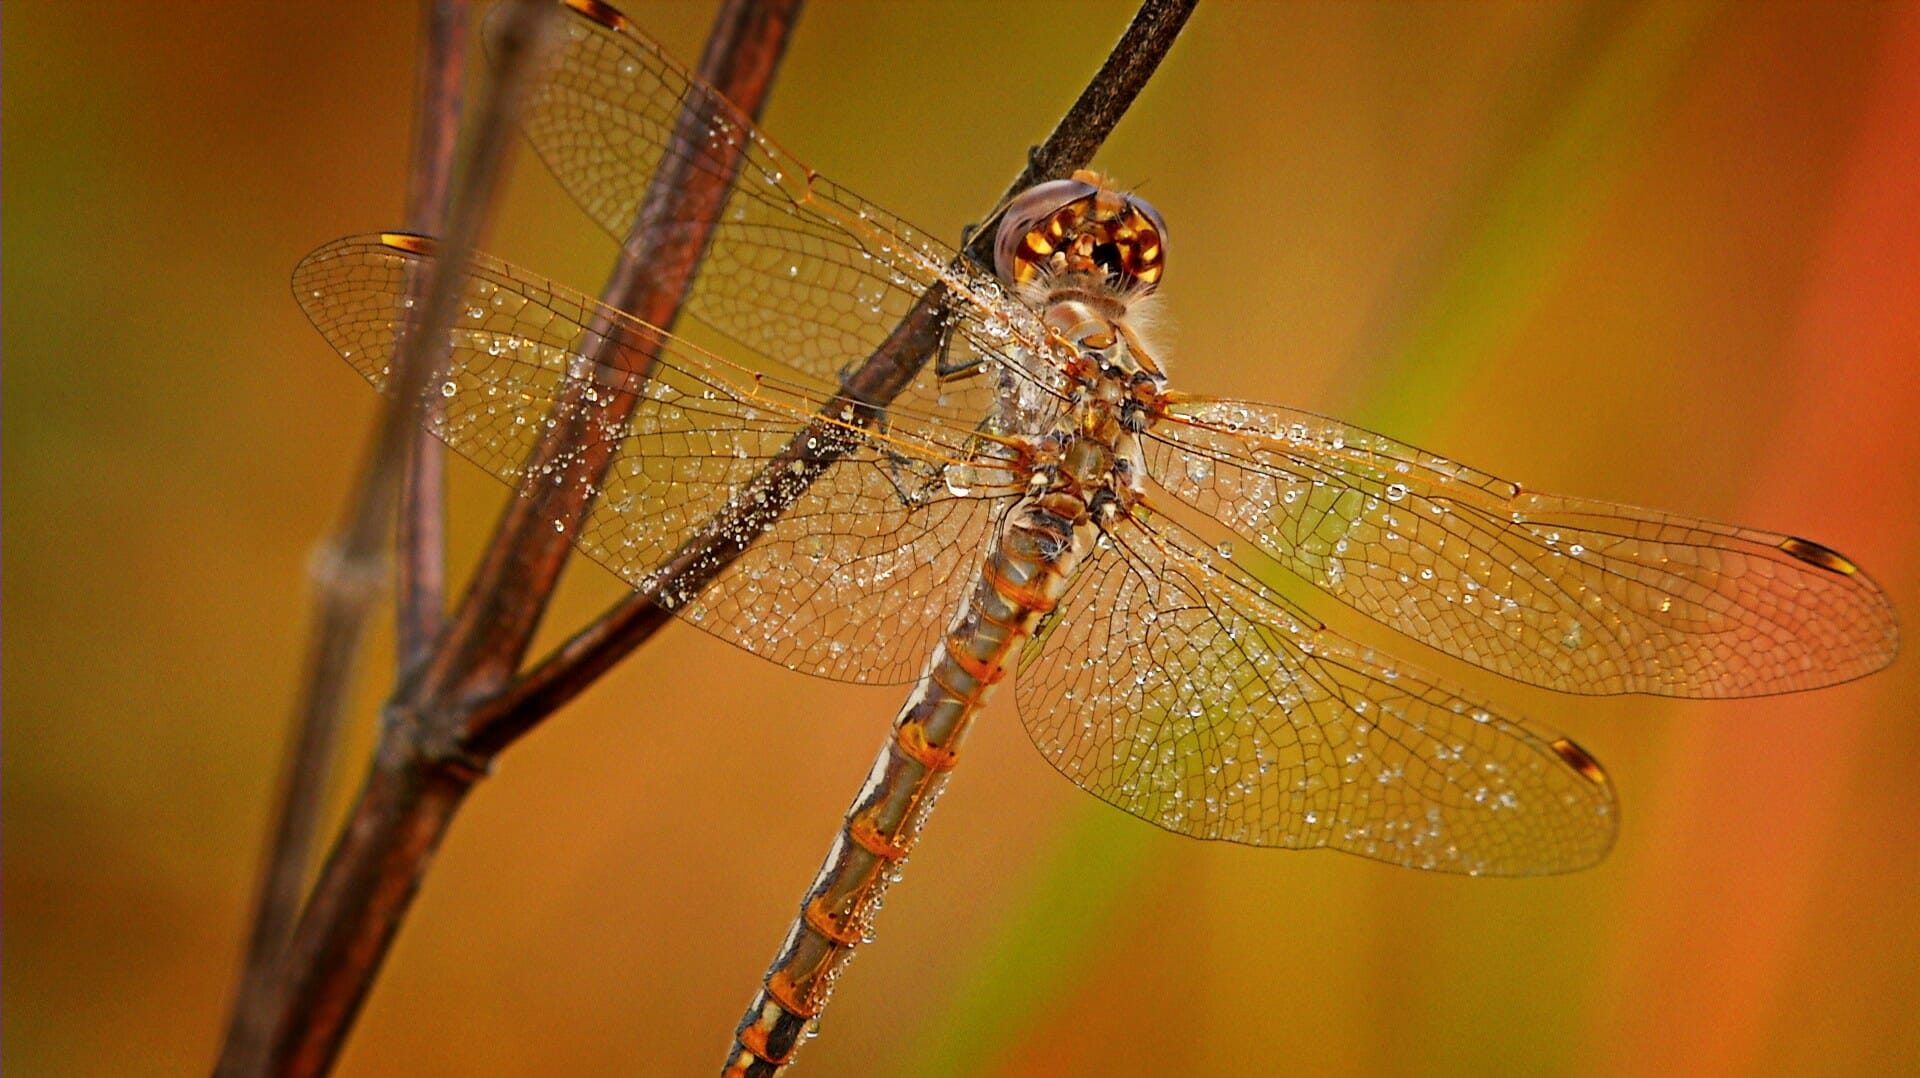 Dragonflies: Tigers of the Sky